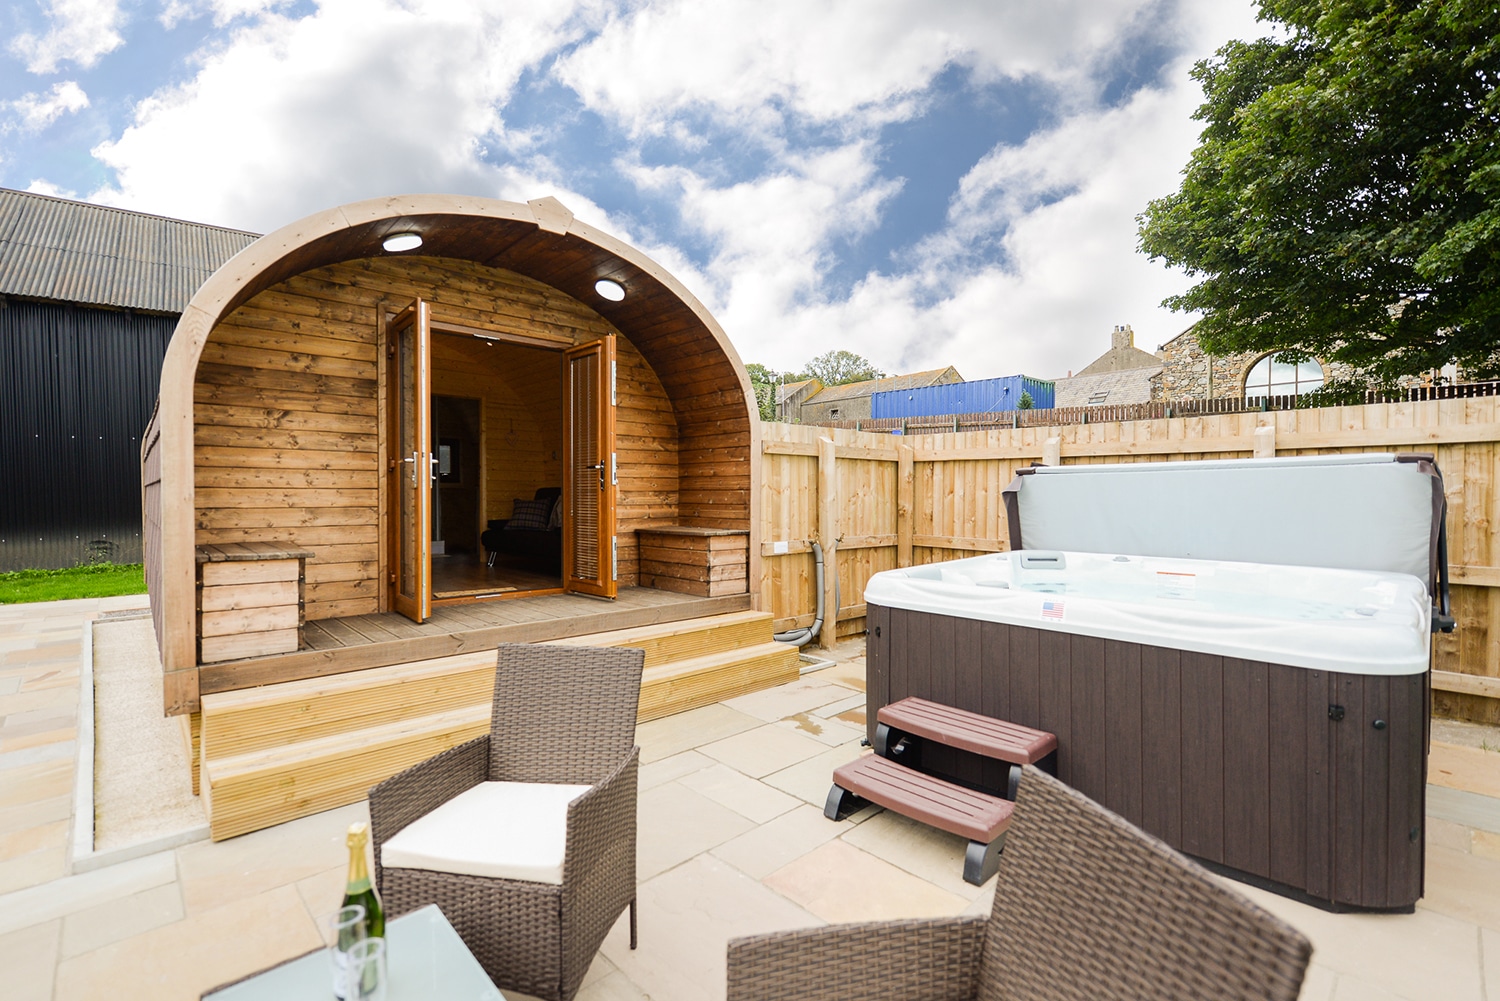 An open glamping pod with a private hot tub